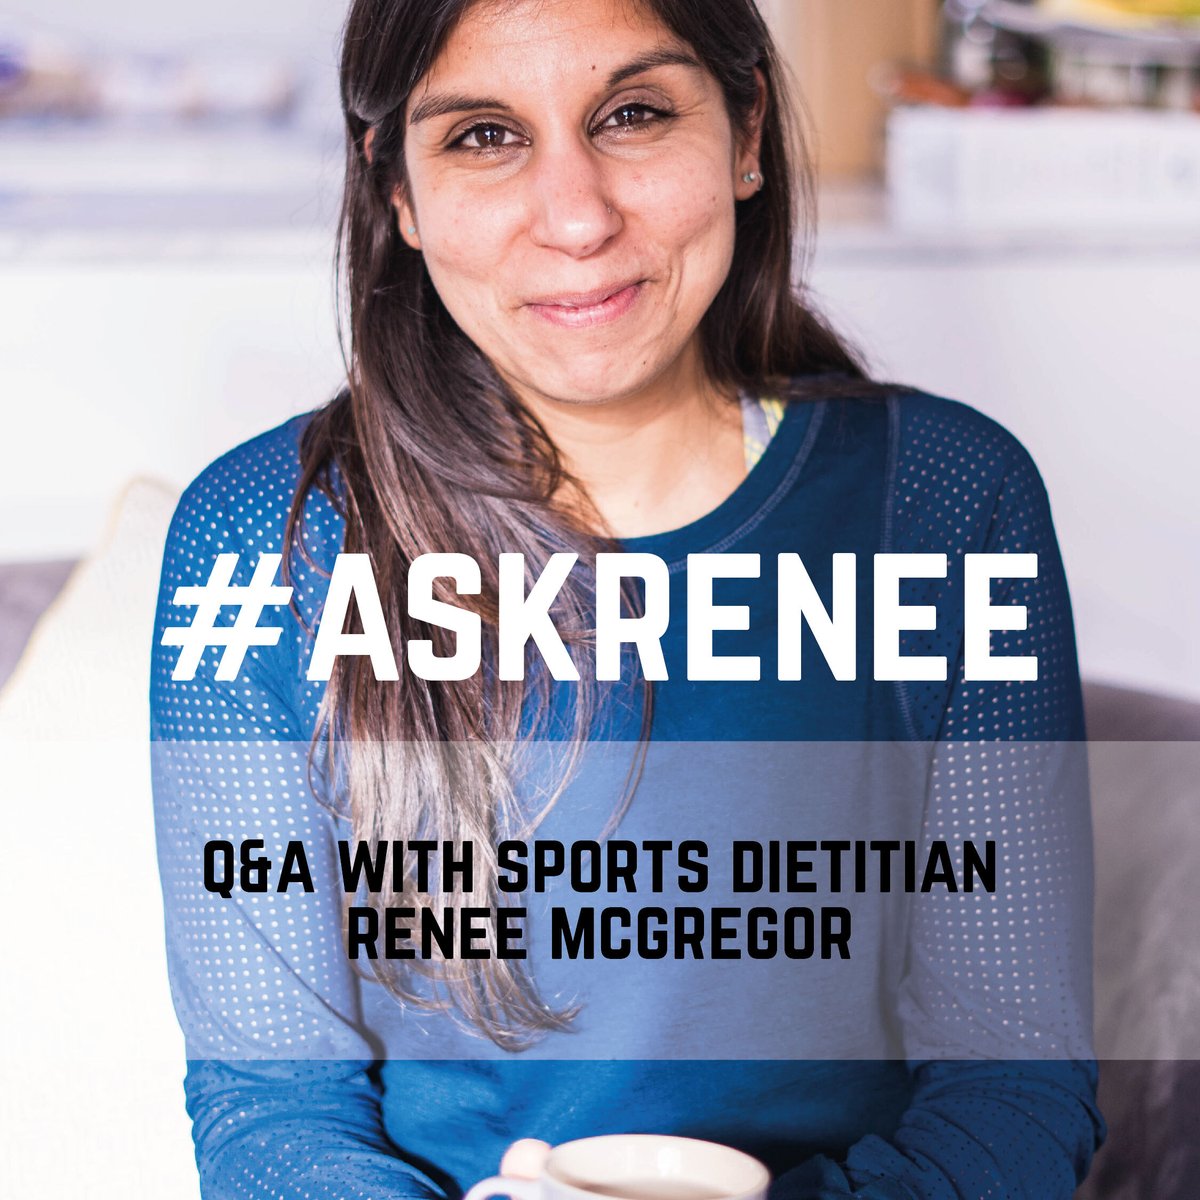 We know how important it is to nail your nutrition plan for training and all too often we hear people say they don't have access to the right information. Our ambassador and leading nutritionist @mcgregor_renee is here to help you out. Simply ask your question below.